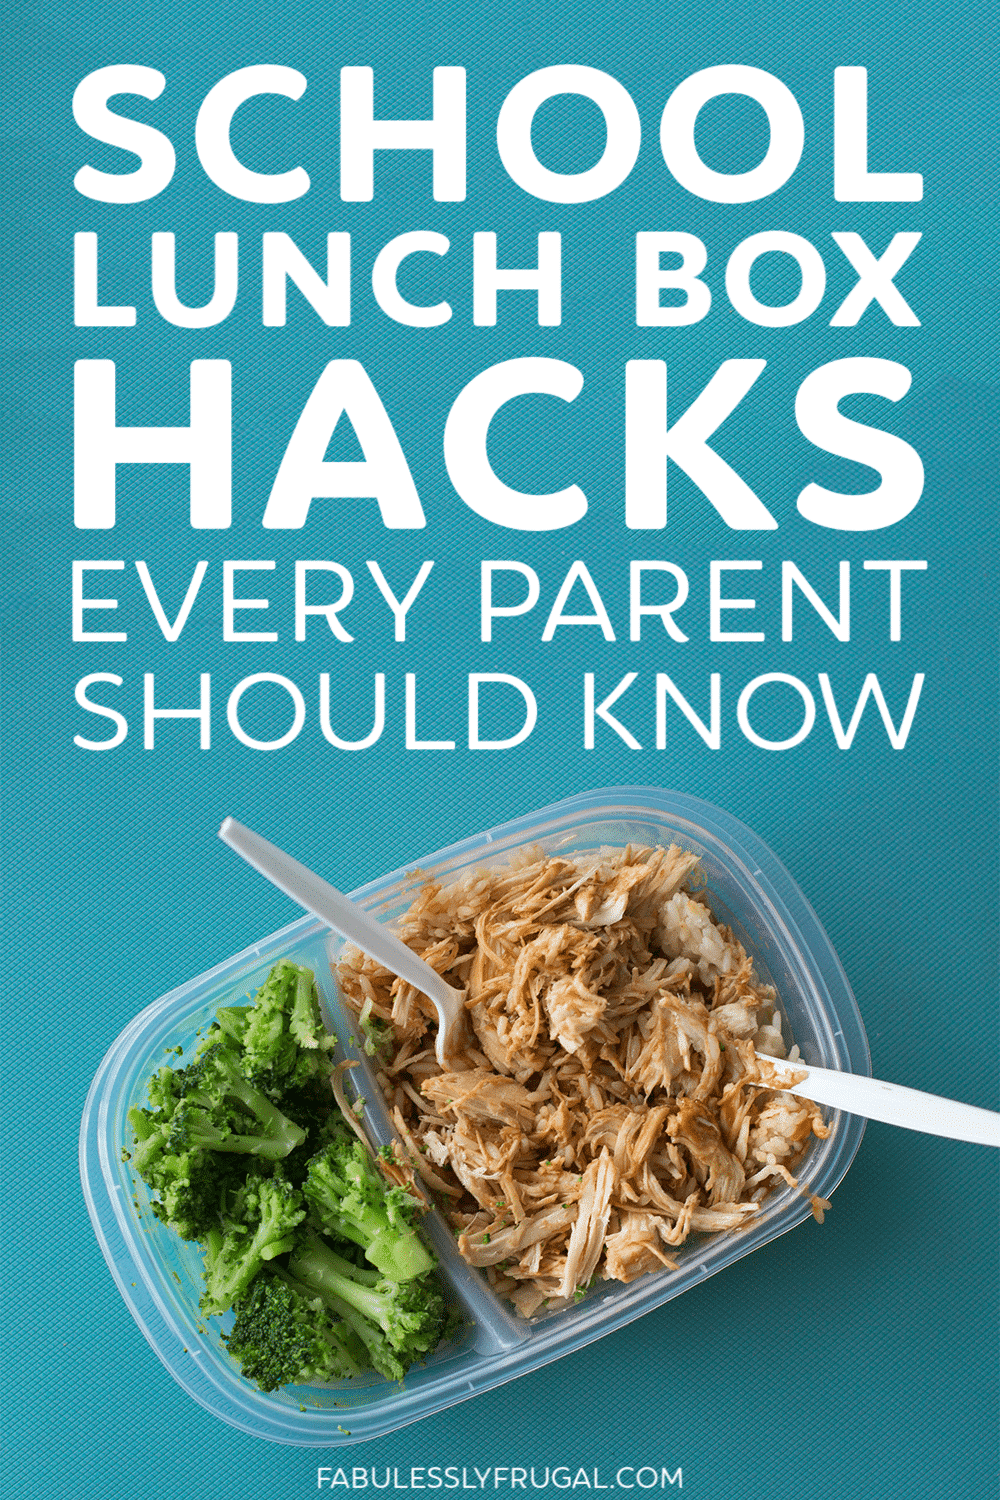 School lunch box hacks every parent should know